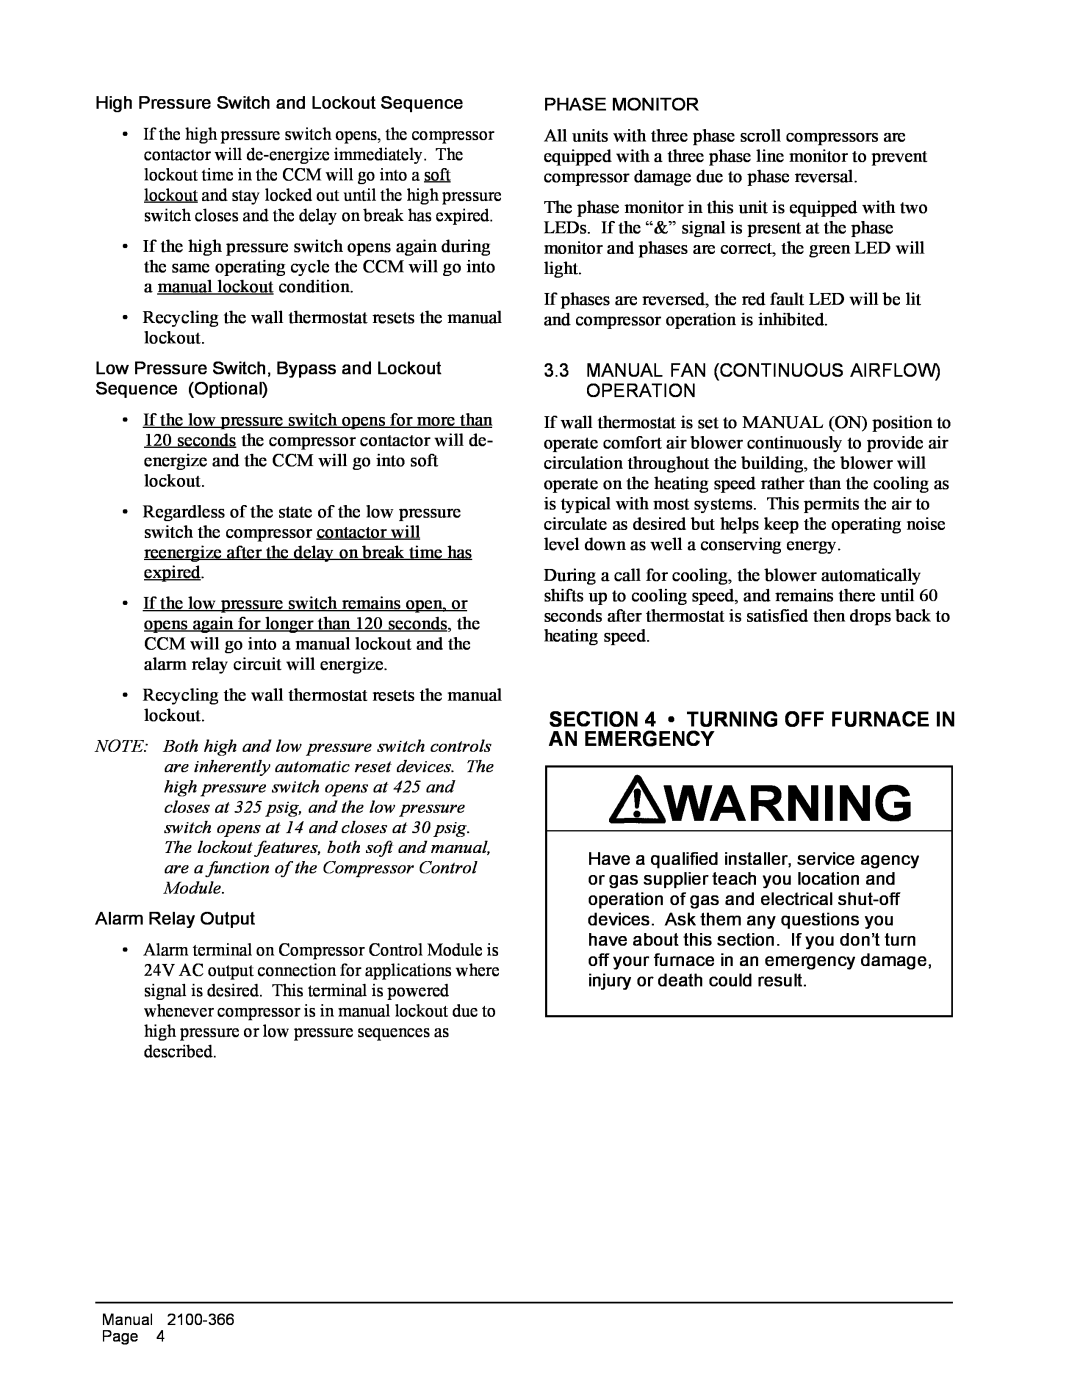 Bard WG-Series installation instructions Turning Off Furnace In An Emergency, 3.3MANUAL FAN CONTINUOUS AIRFLOW OPERATION 